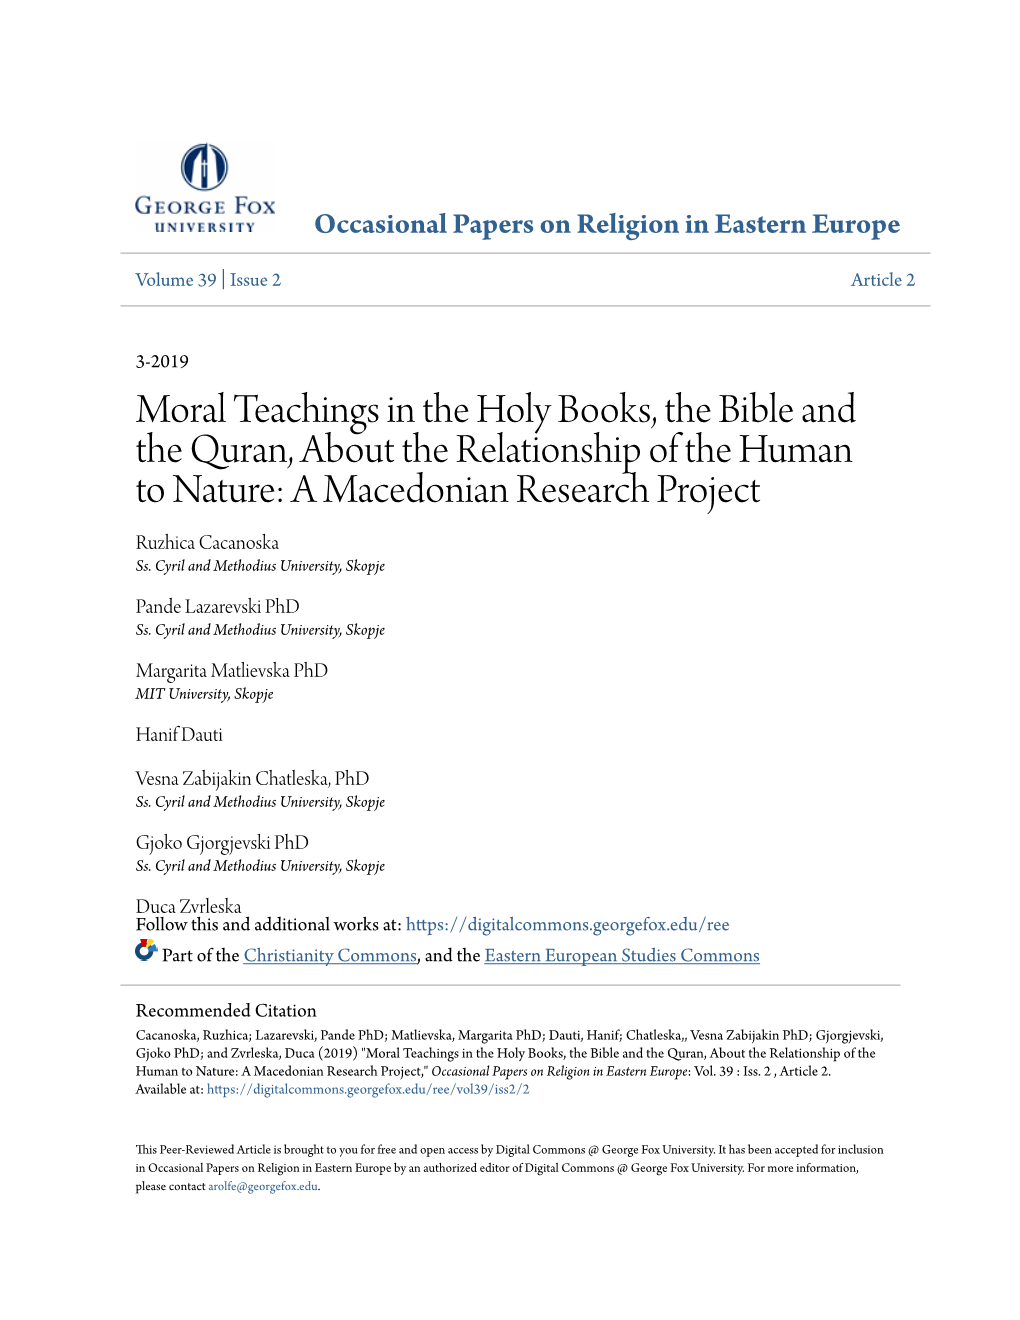 Moral Teachings in the Holy Books, the Bible and the Quran, About the Relationship of the Human to Nature: a Macedonian Research Project Ruzhica Cacanoska Ss